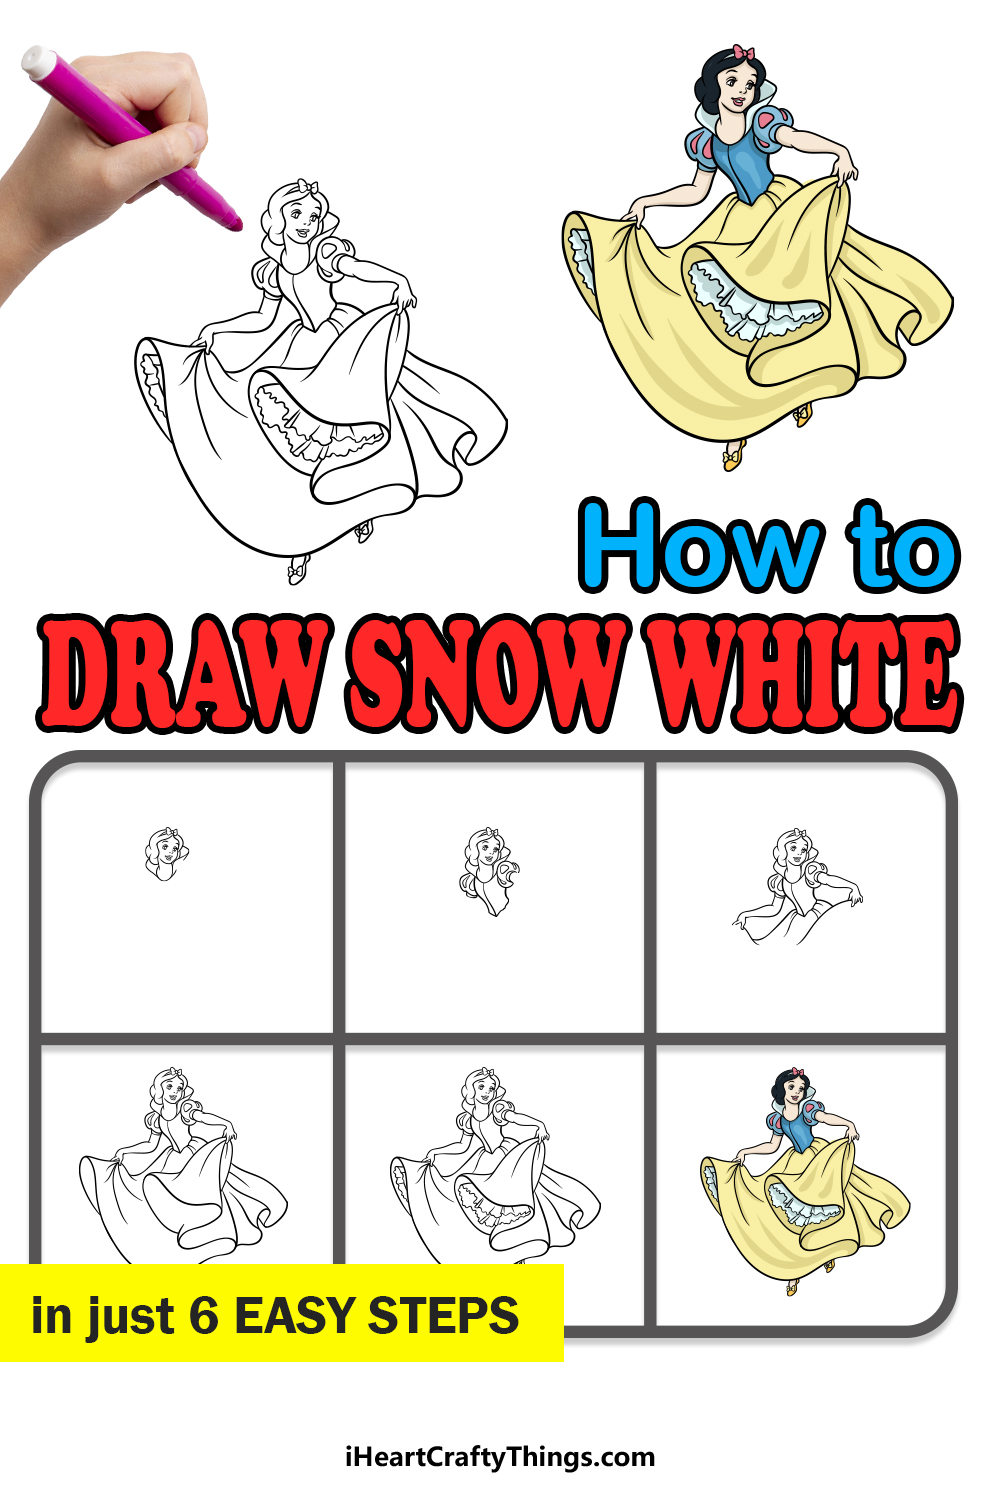 how to draw Snow White in 6 easy steps